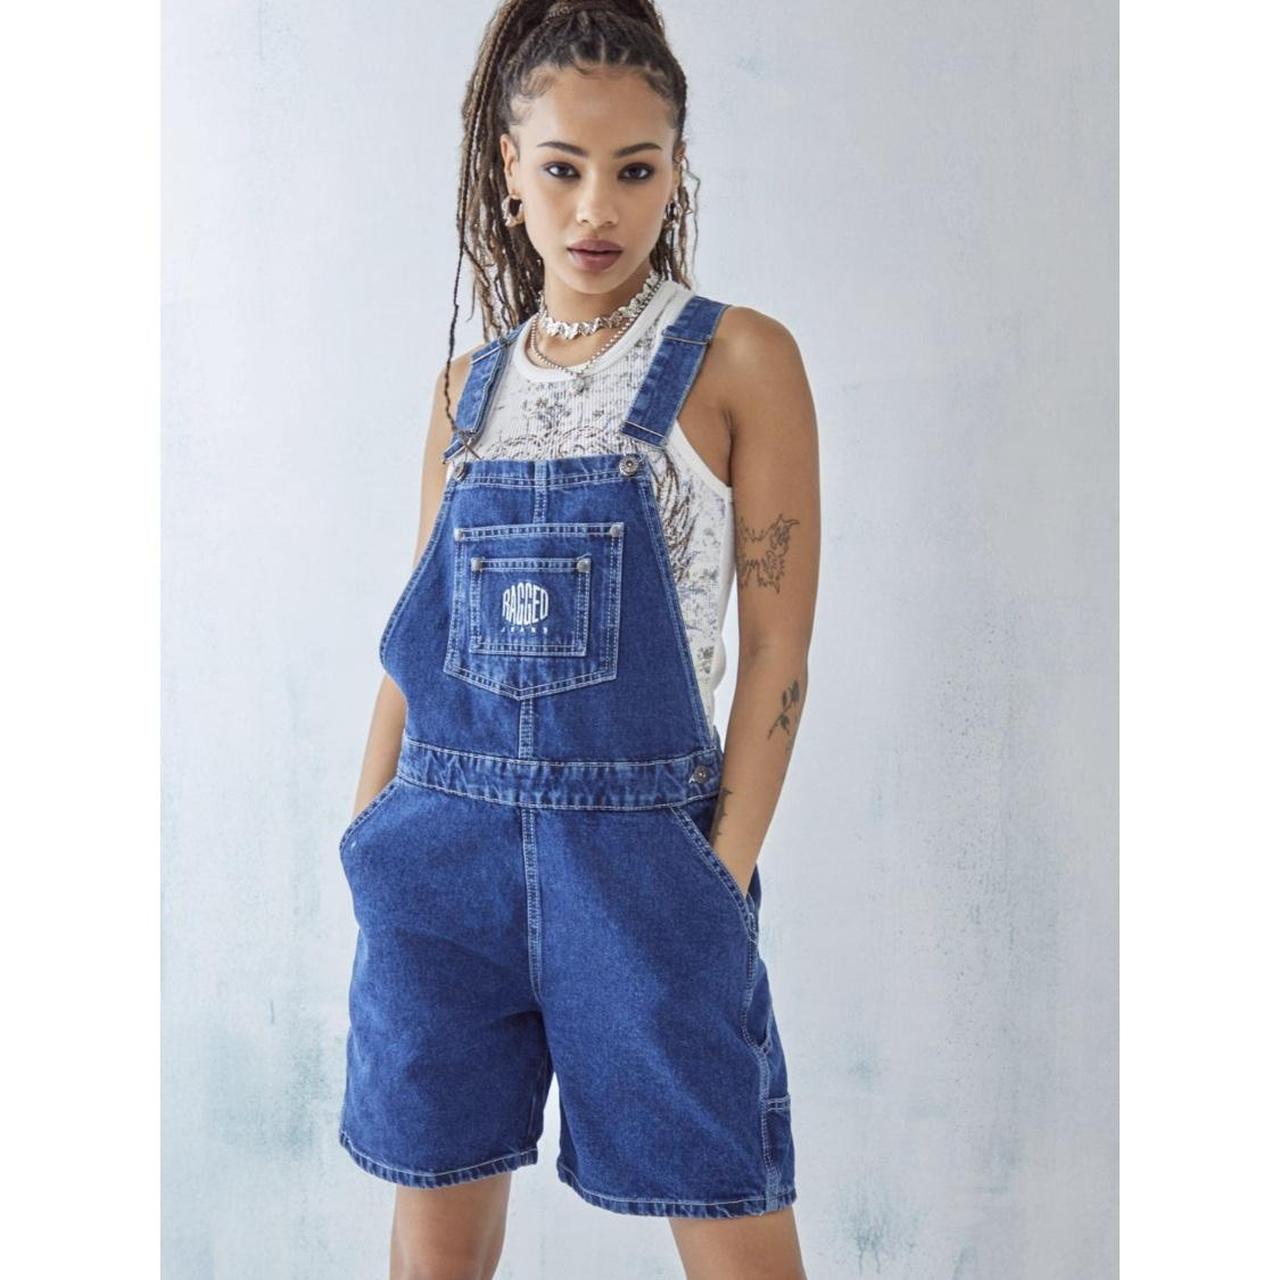 Ragged Blue Dungarees – The Ragged Priest